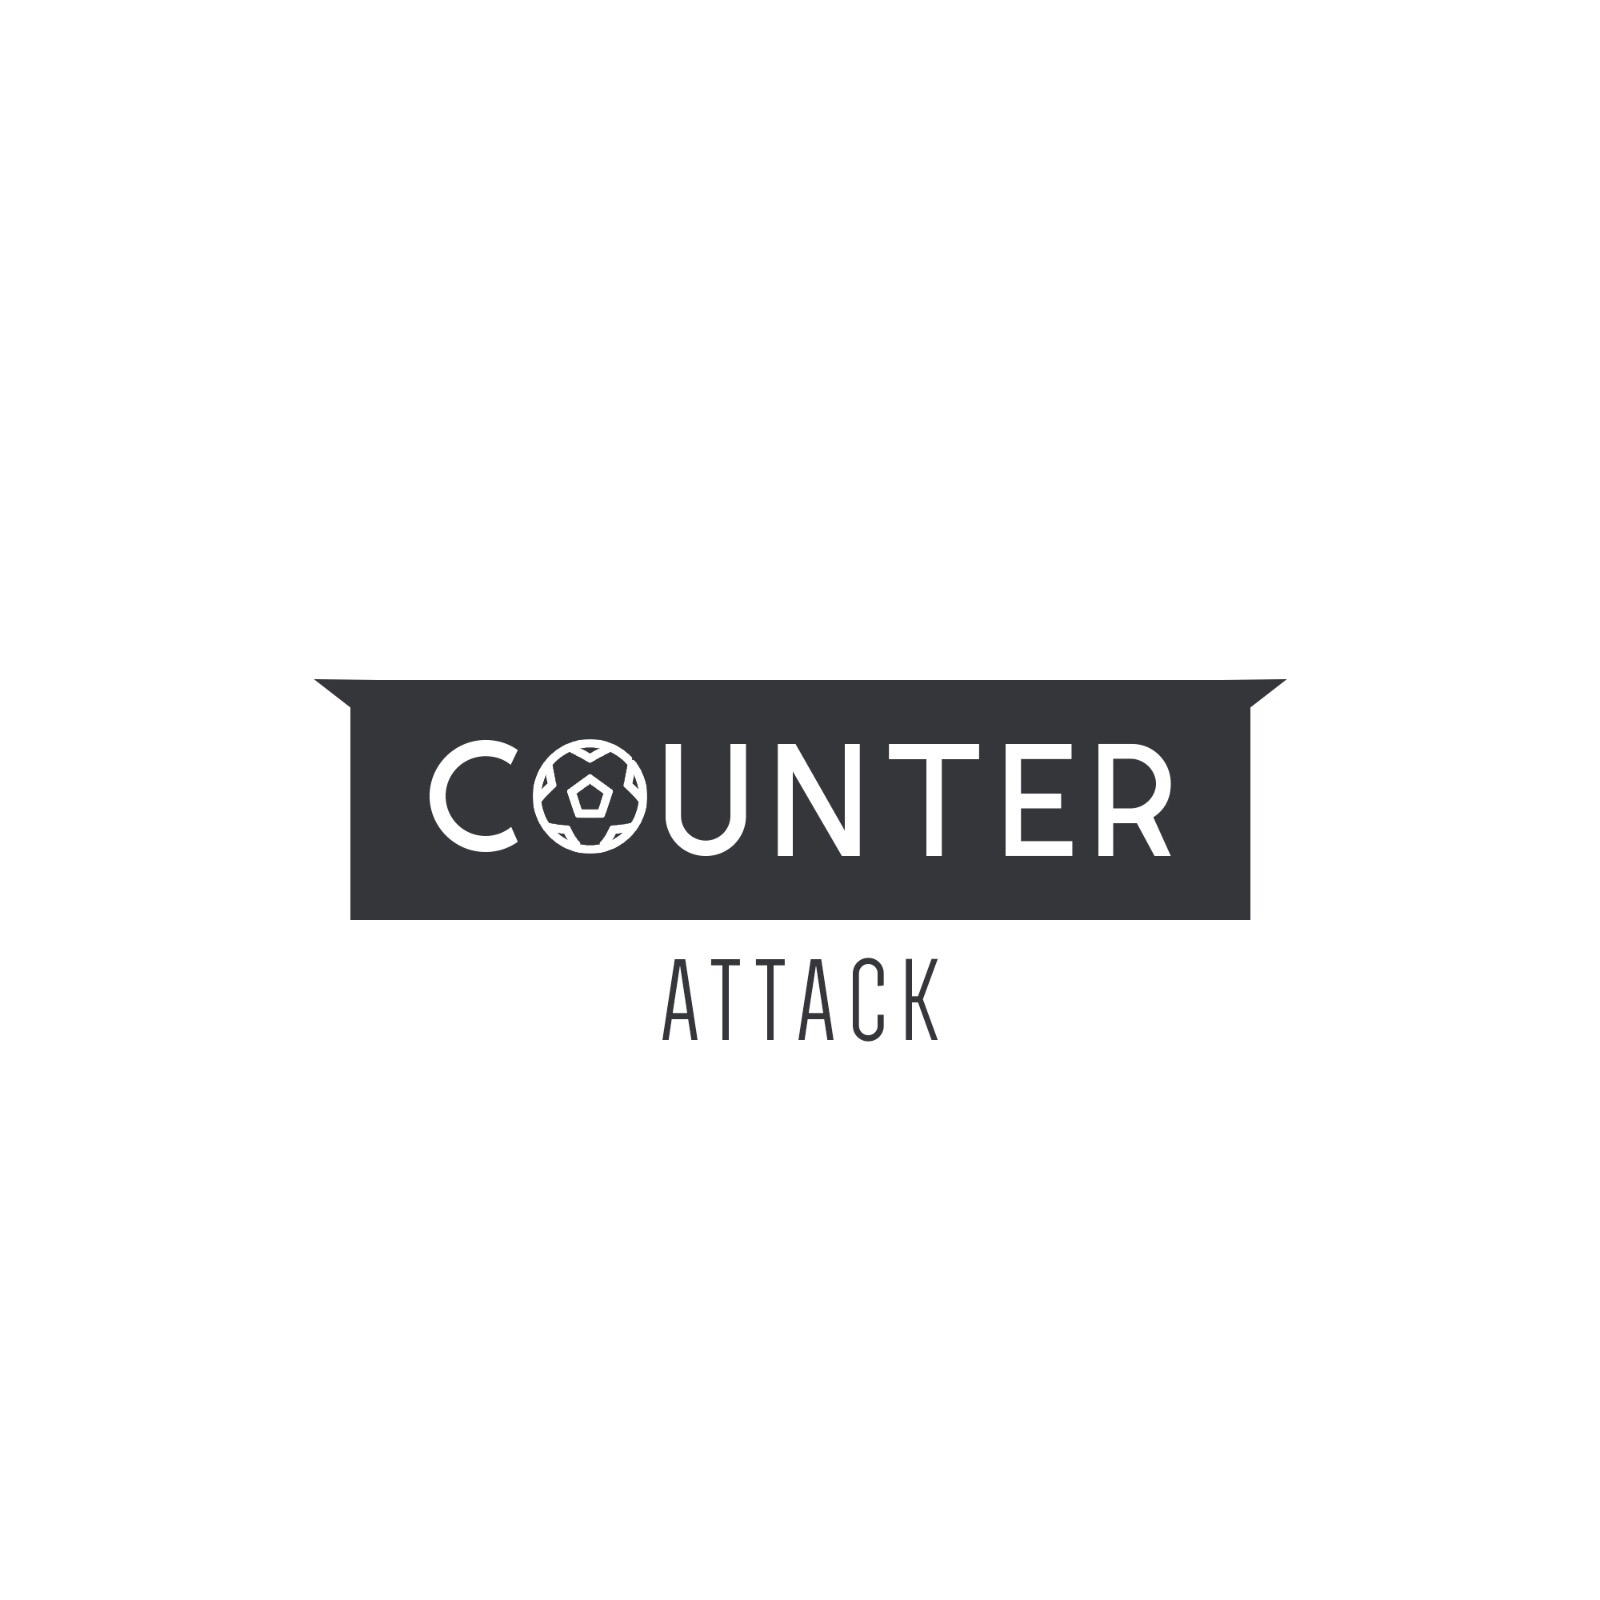 Counter Attack - Episode 34 - Should More Players Play for their Home Countries